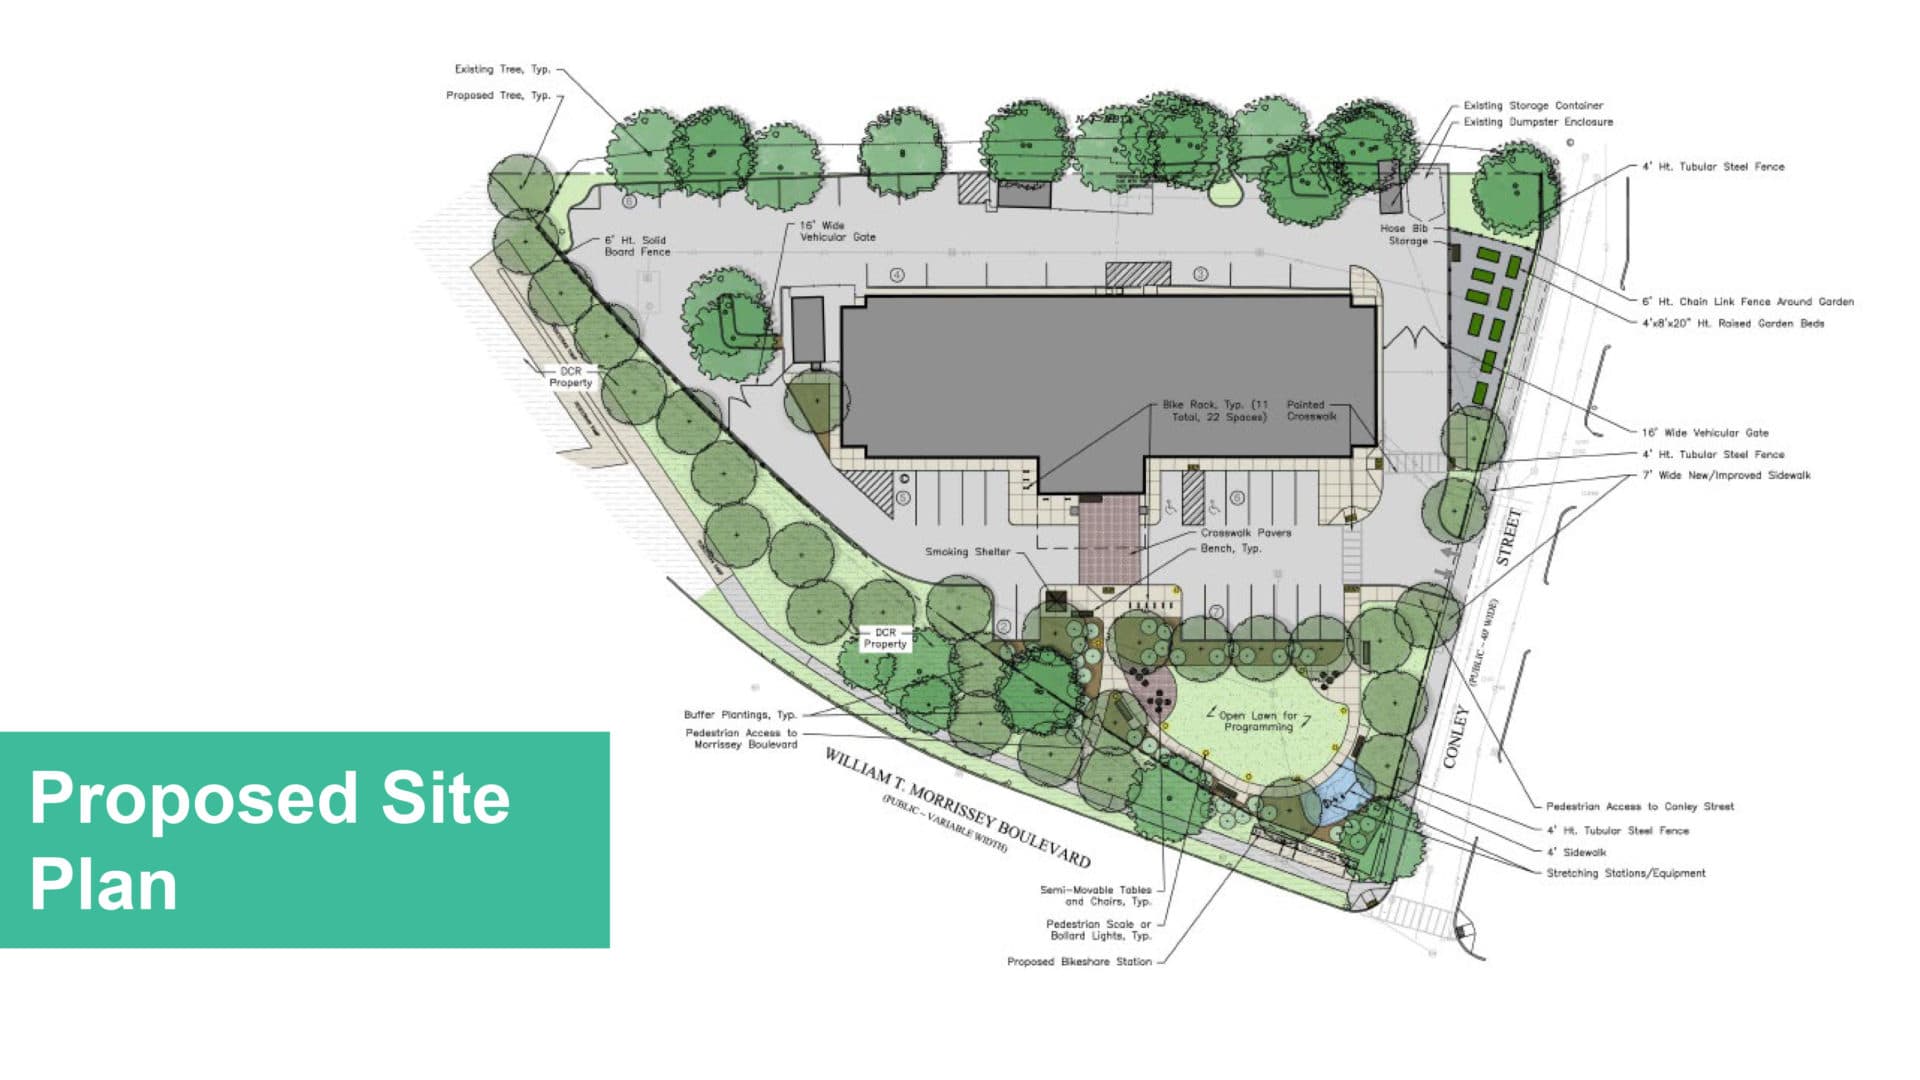 The proposed site plan for the conversion of the Comfort Inn at 900 Morrissey Boulevard in Dorchester. (Image via a presentation from the Boston Planning and Development Agency)